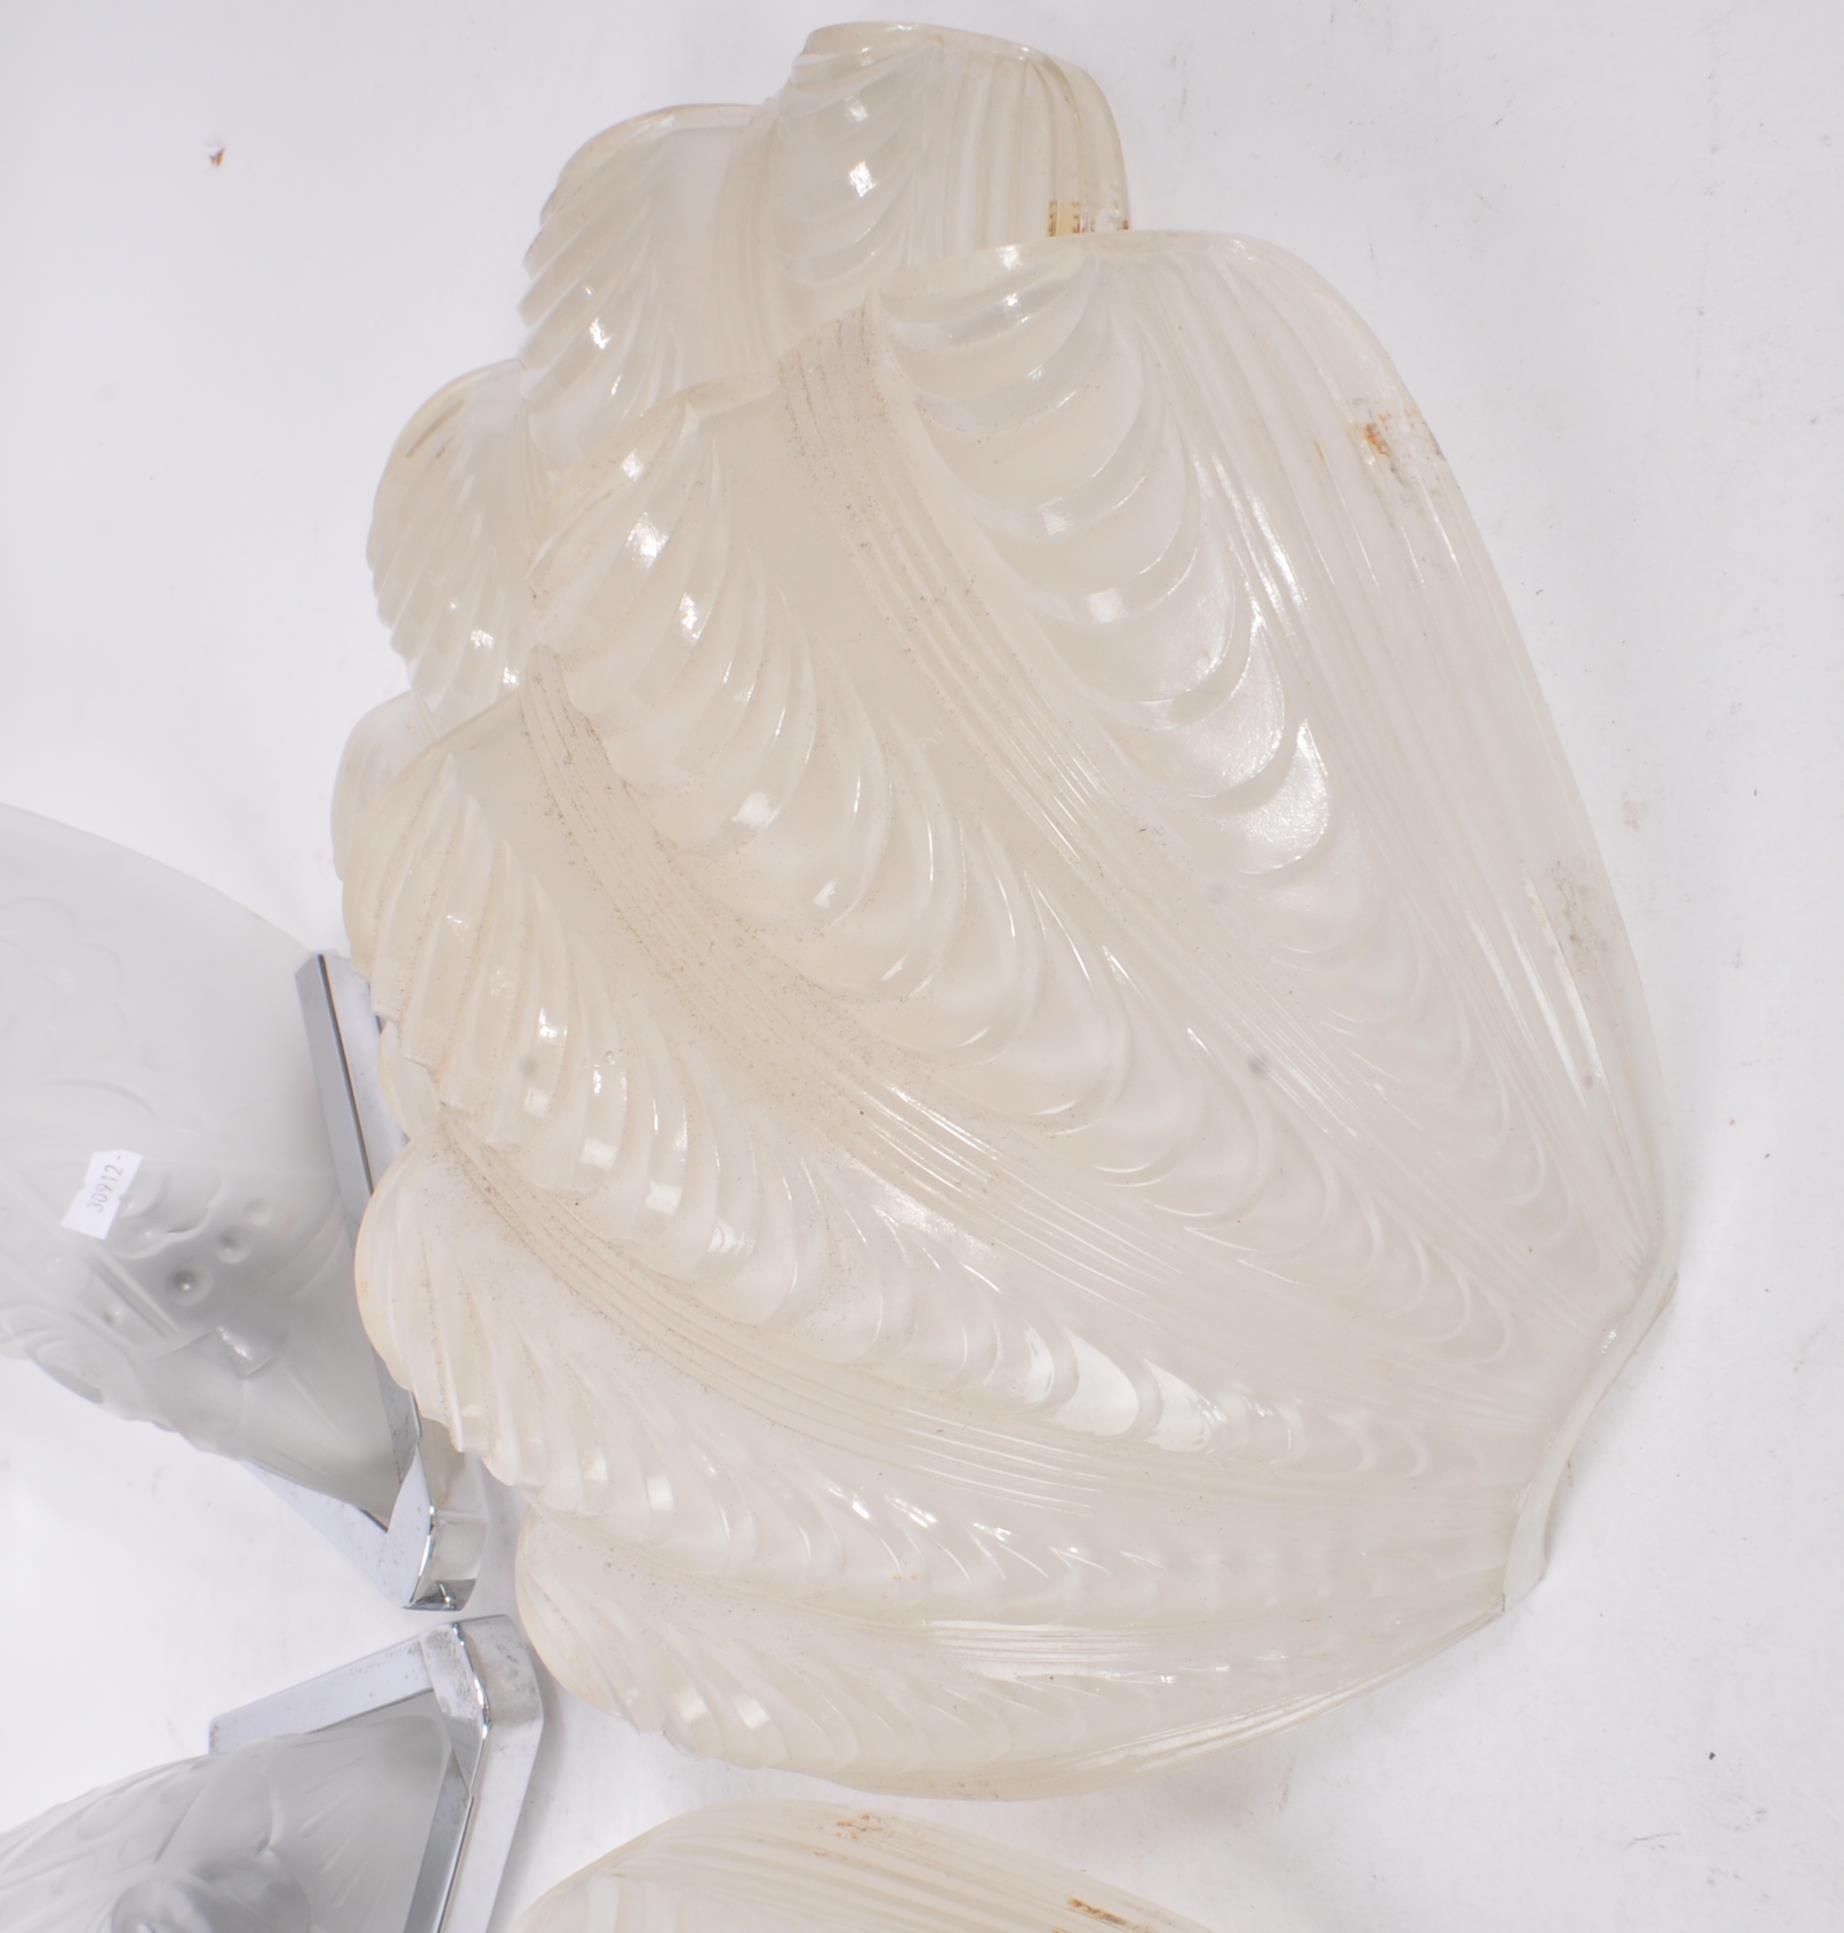 PAIR OF ART DECO SCONCE LIGHTS WITH FOUR CLAM SHELL SHADES - Image 3 of 9